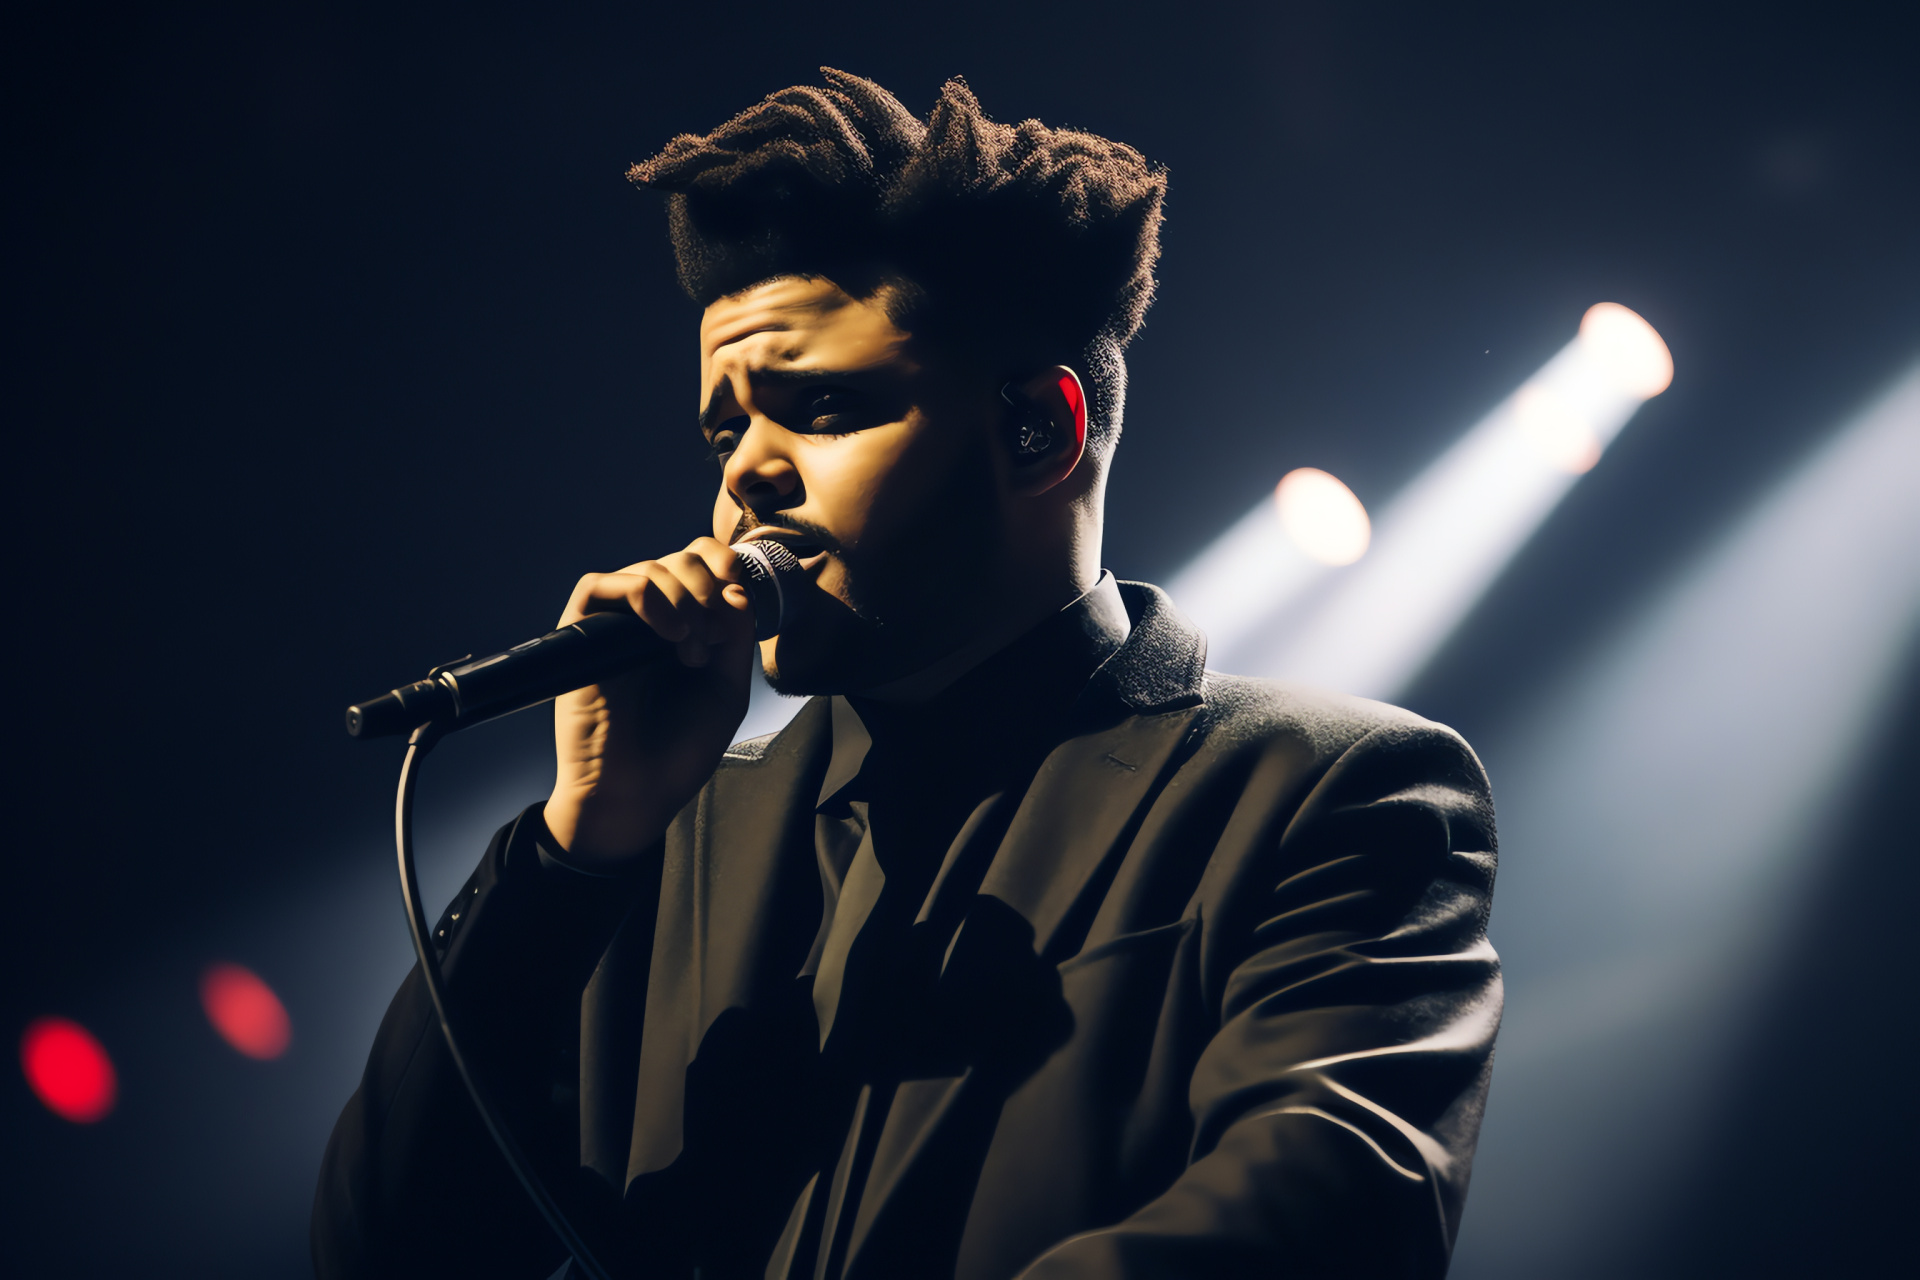 The Weeknd, Album promotion, Stage setting, Classic outfit, Singing talent, HD Desktop Wallpaper